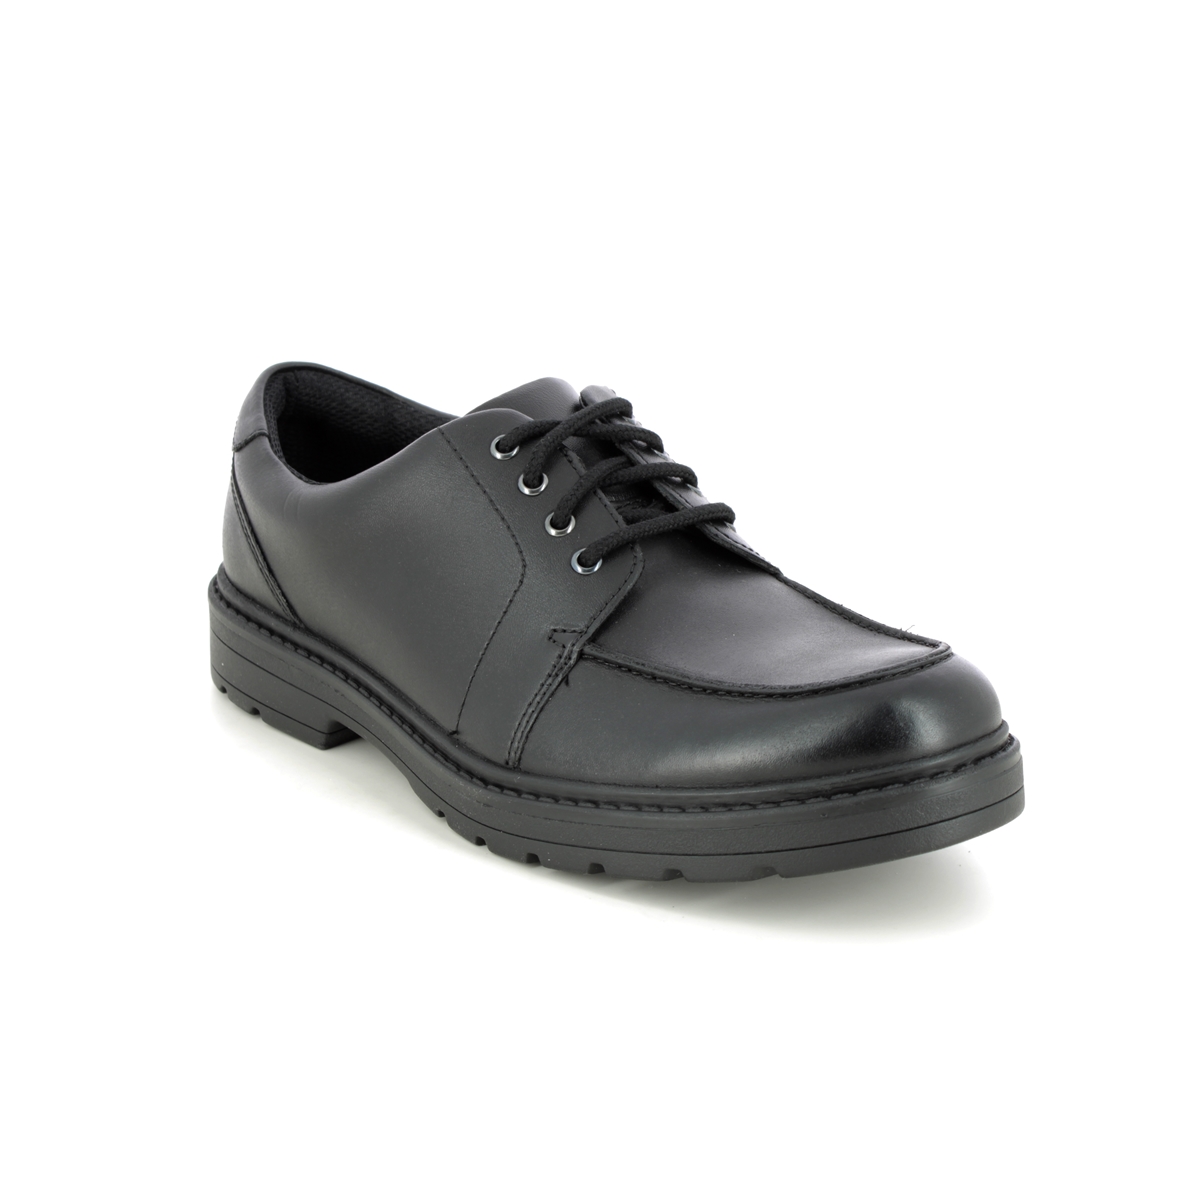 Clarks Loxham Pace Y Black Kids Boys Shoes 515926F In Size 4.5 In Plain Black F Width Fitting Regular Fit For School For kids